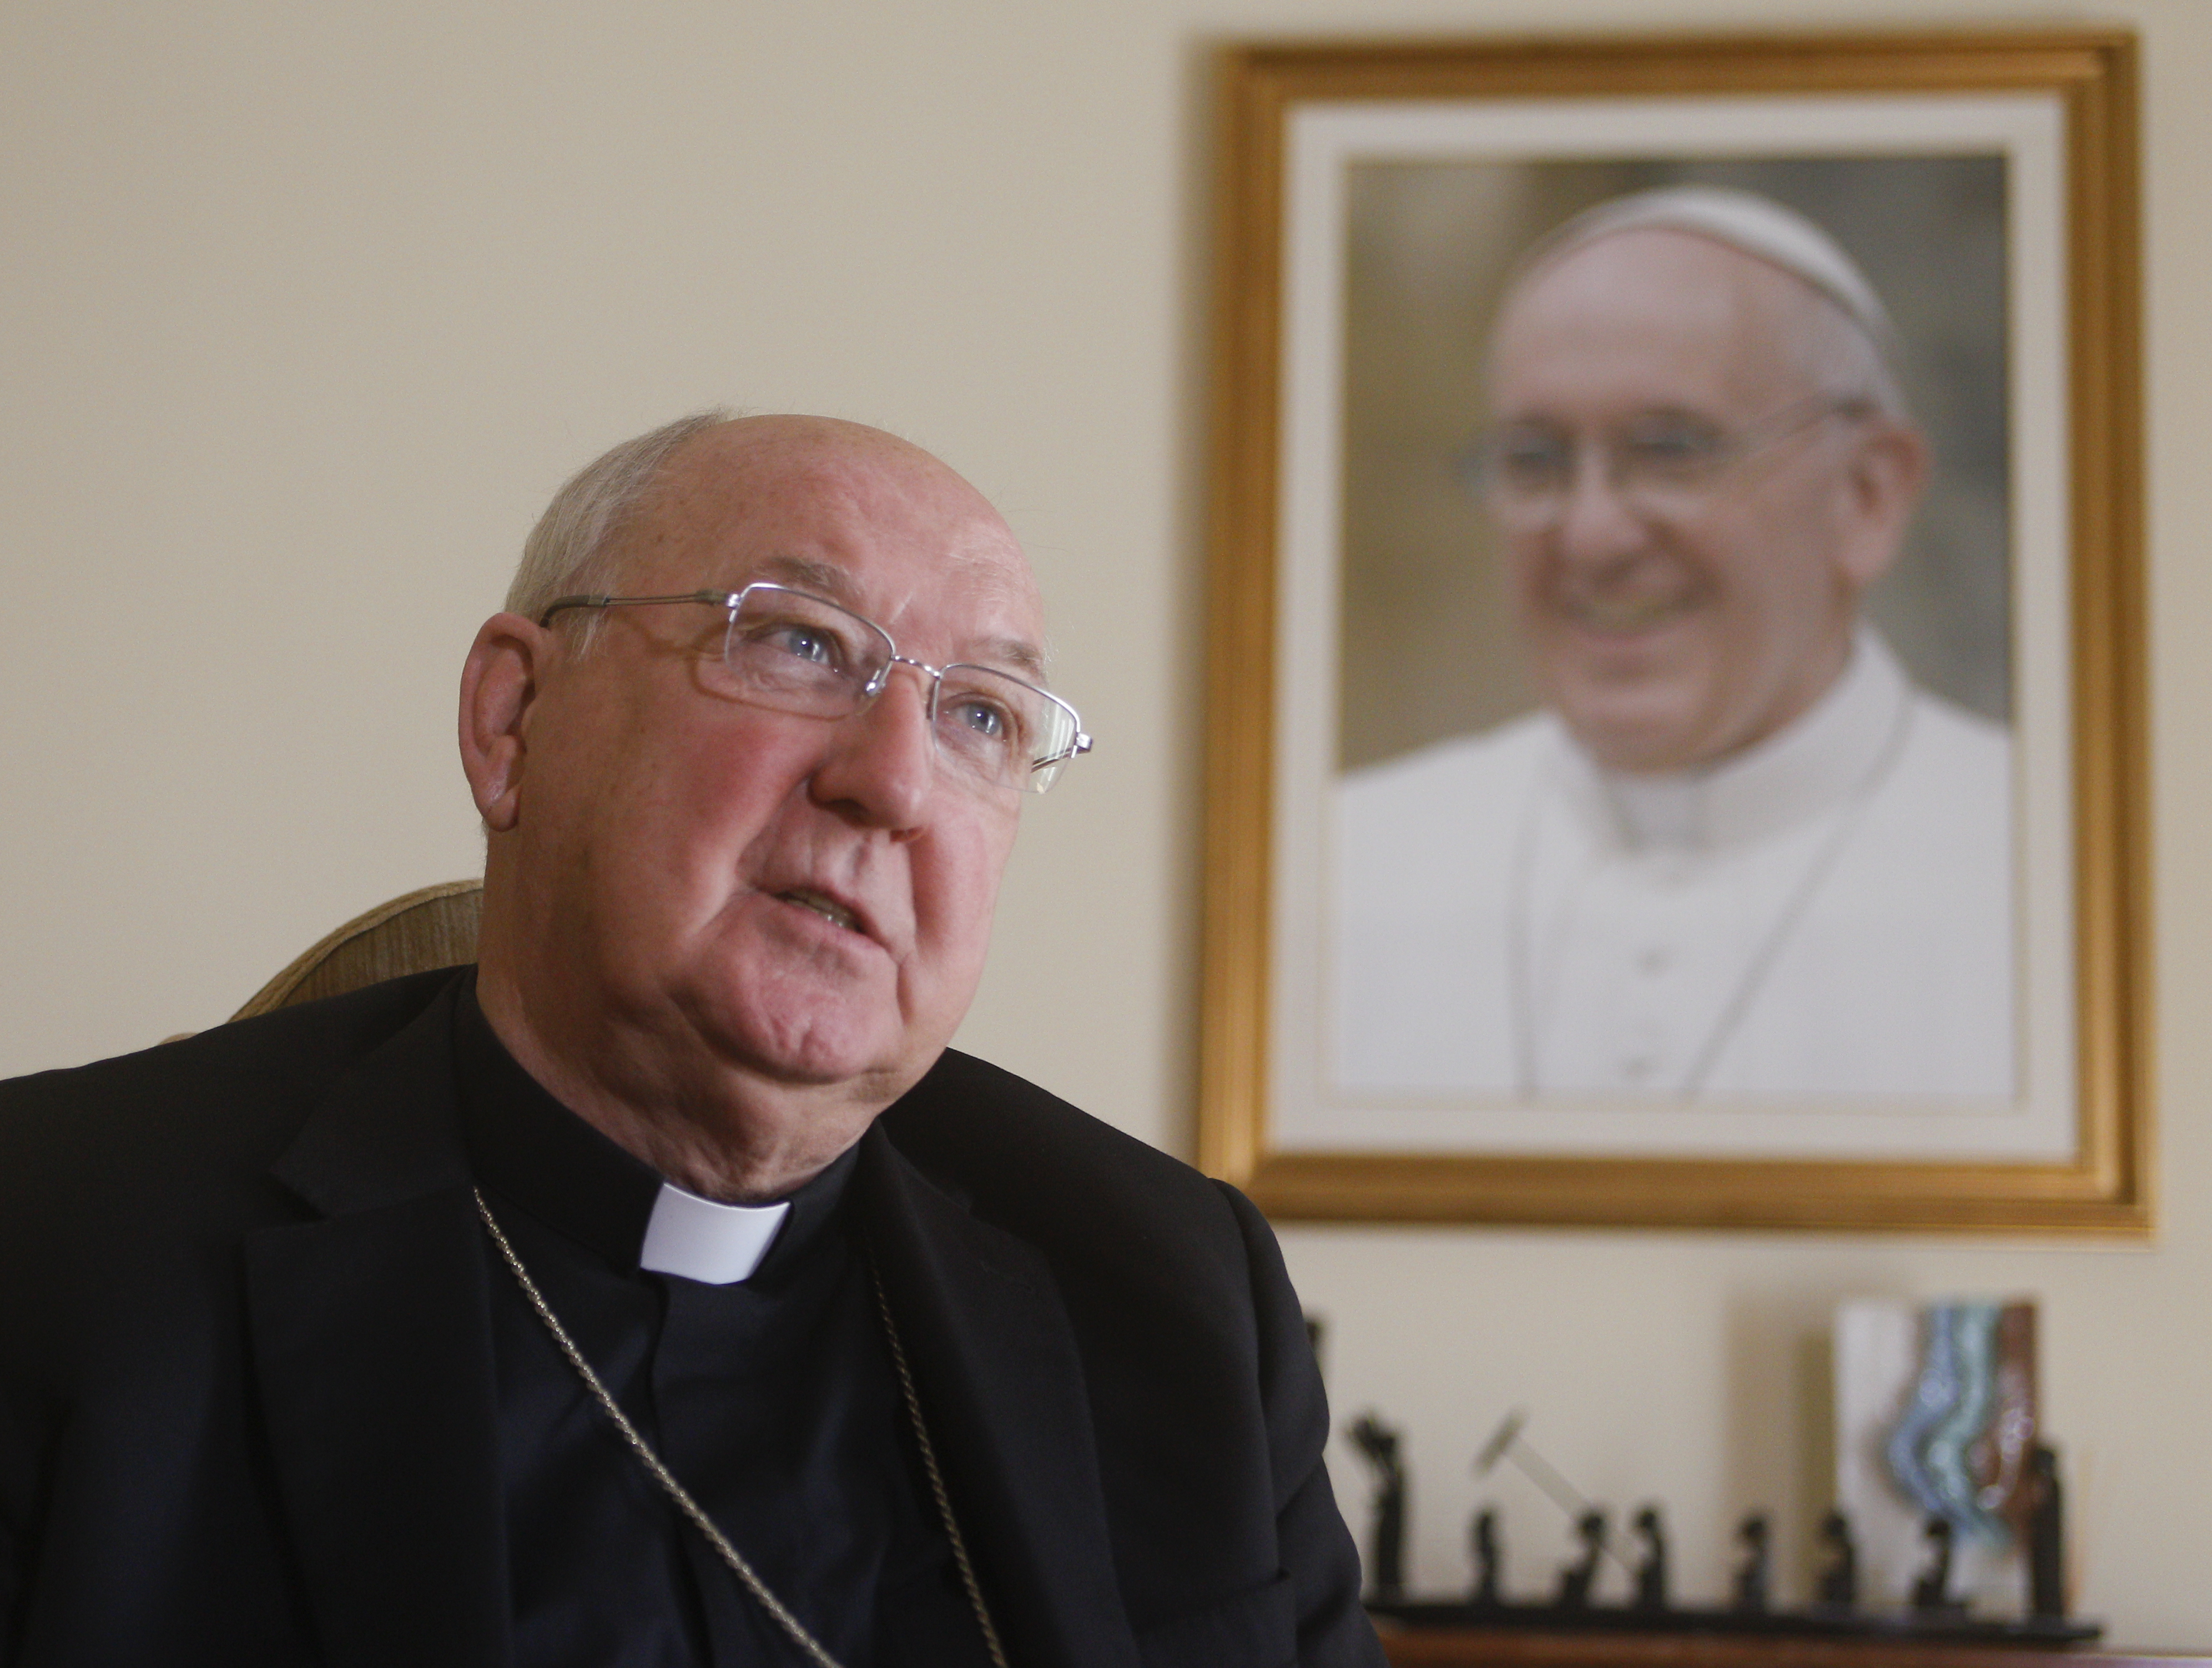 Francis' family life teaching 'overwhelmingly well-received' says Farrell 